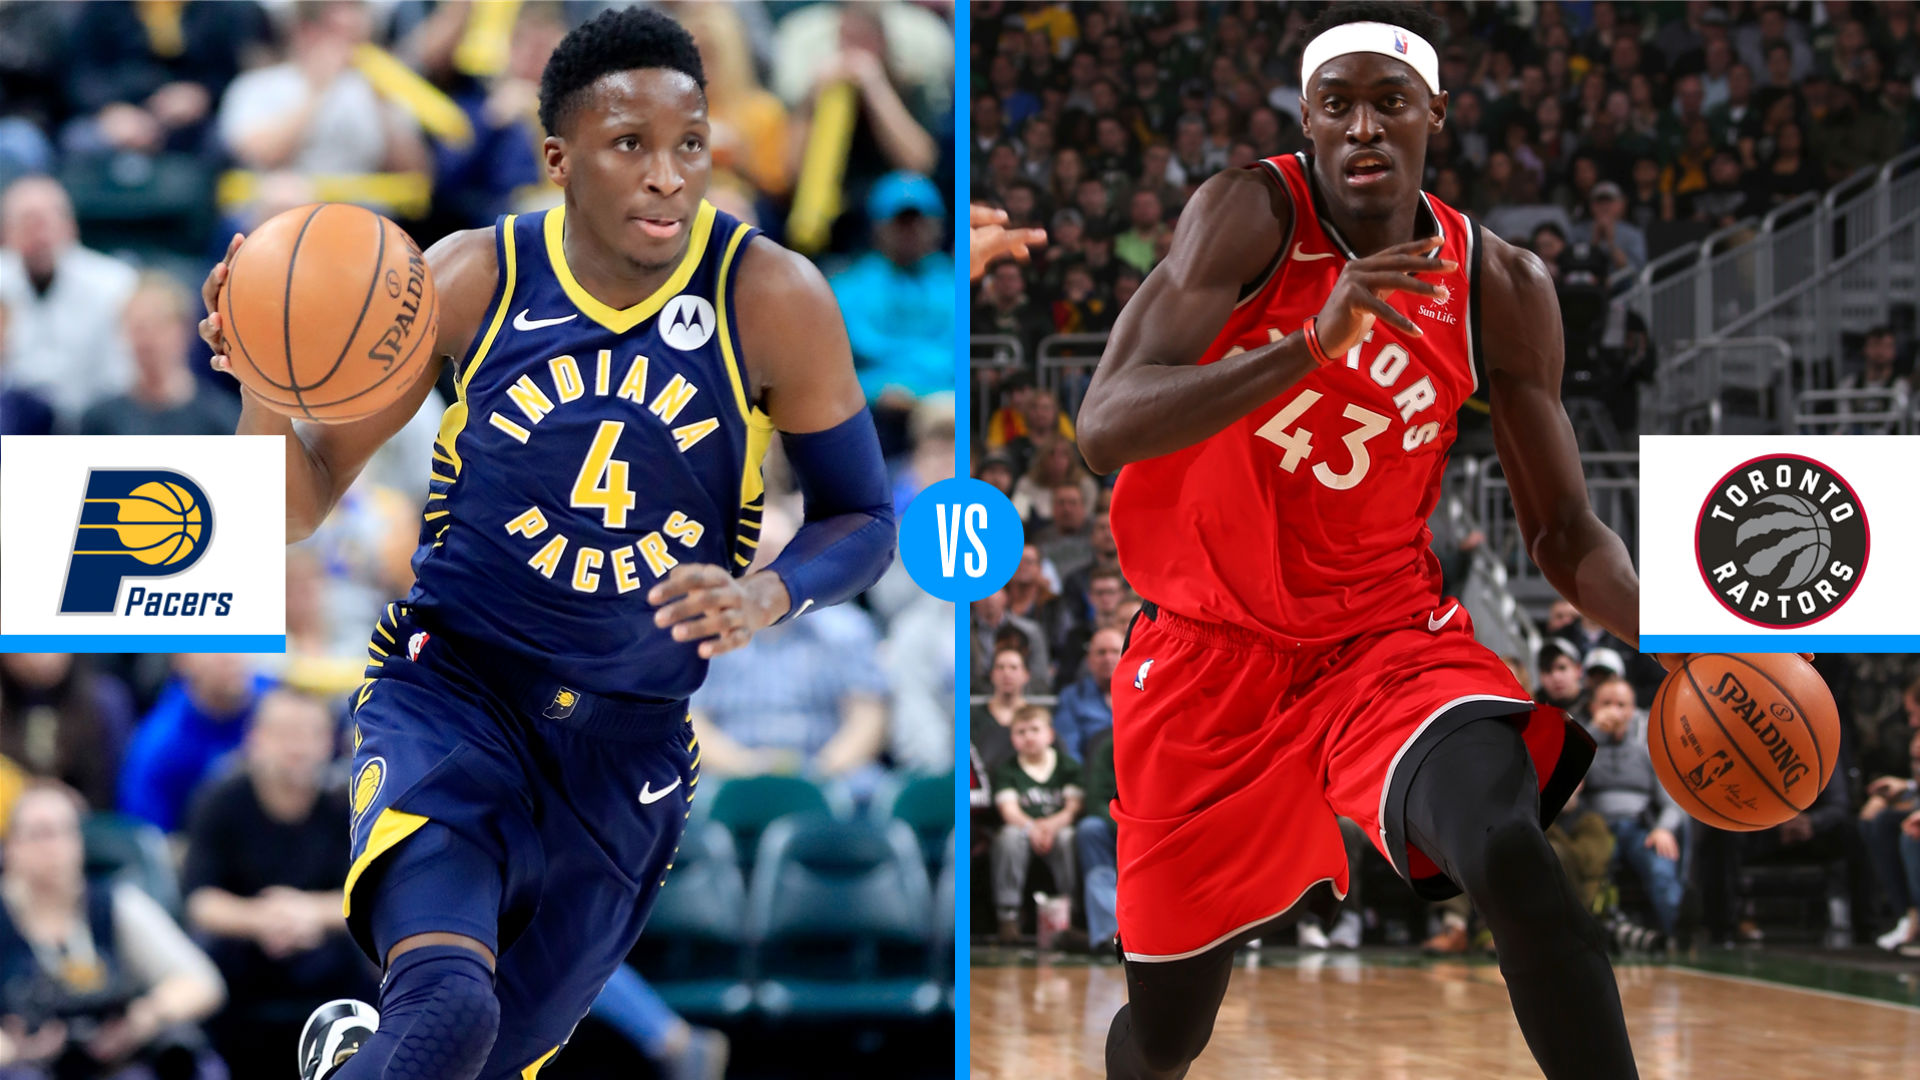 Indiana Pacers vs Toronto Raptors: Game preview, live stream, TV channel, start time ...1920 x 1080